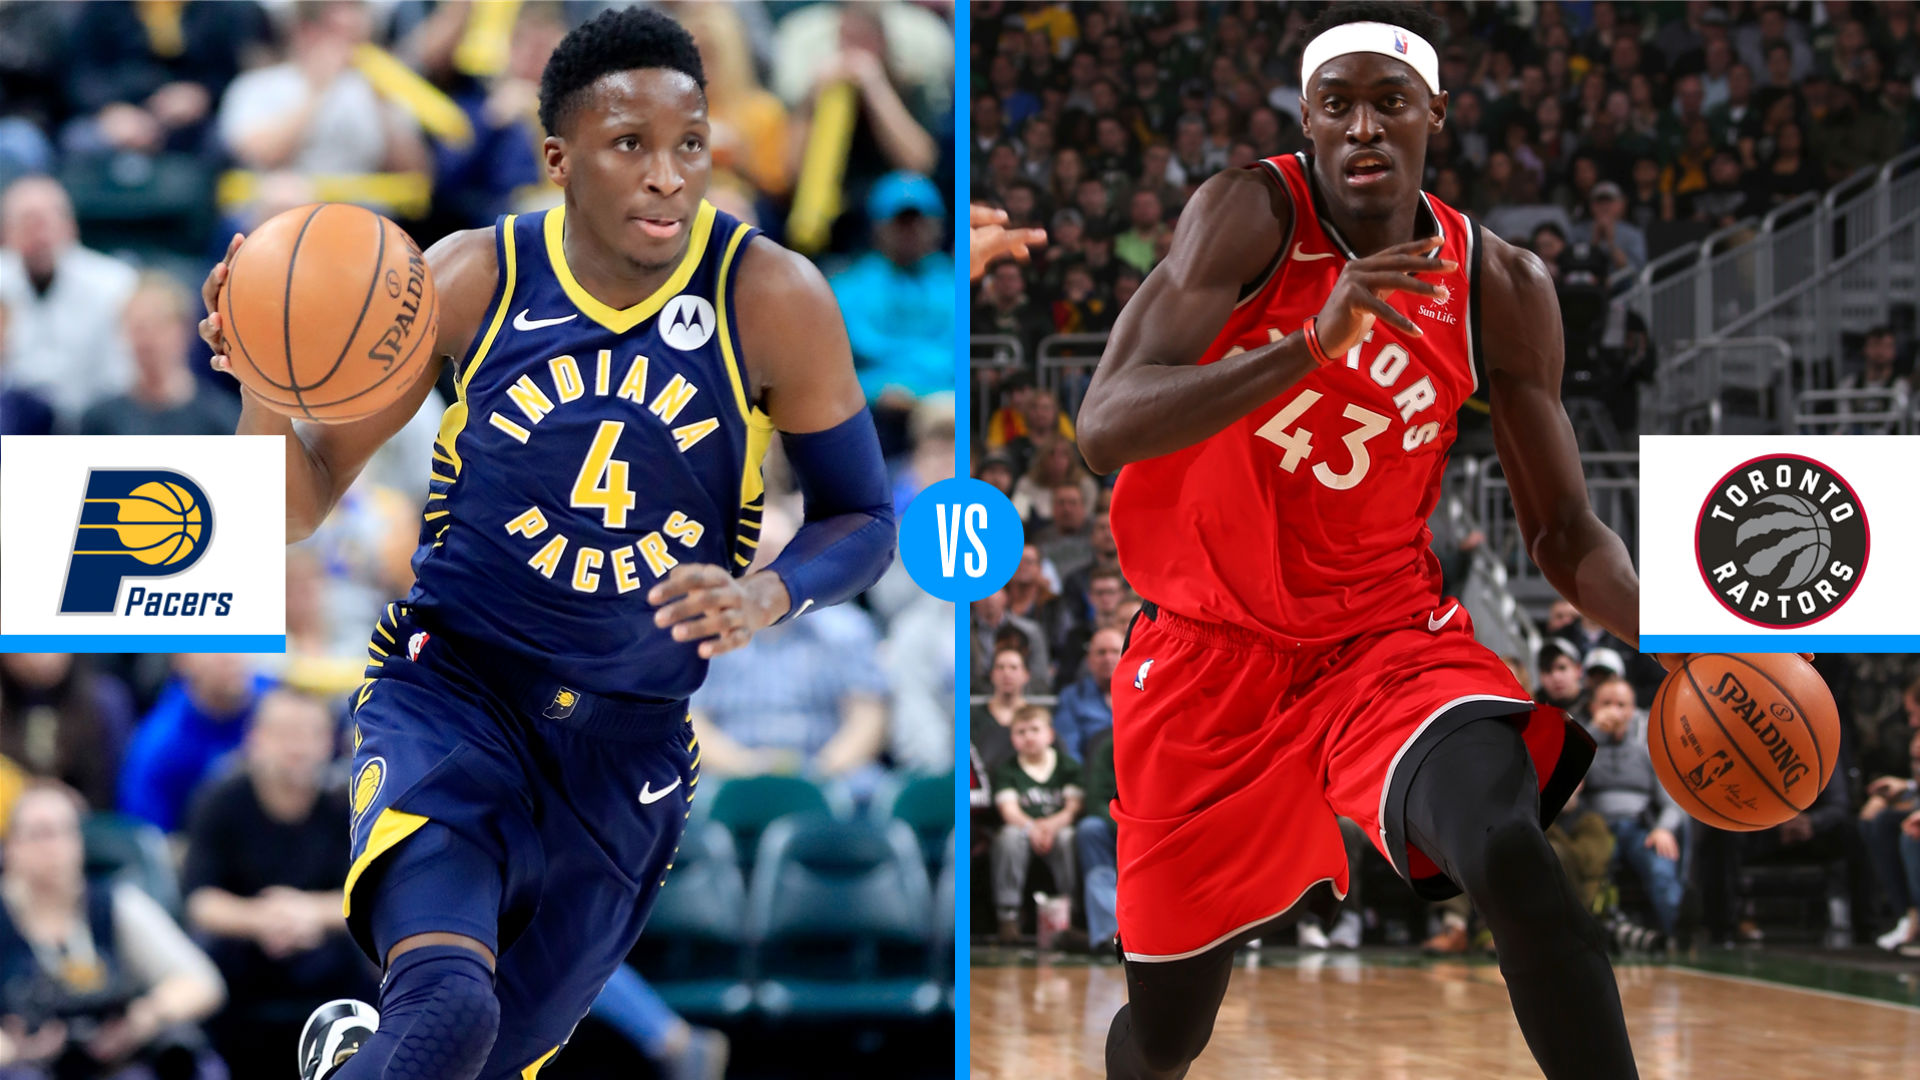 Indiana Pacers vs Toronto Raptors: Game preview, live stream, TV channel, start time ...1920 x 1080